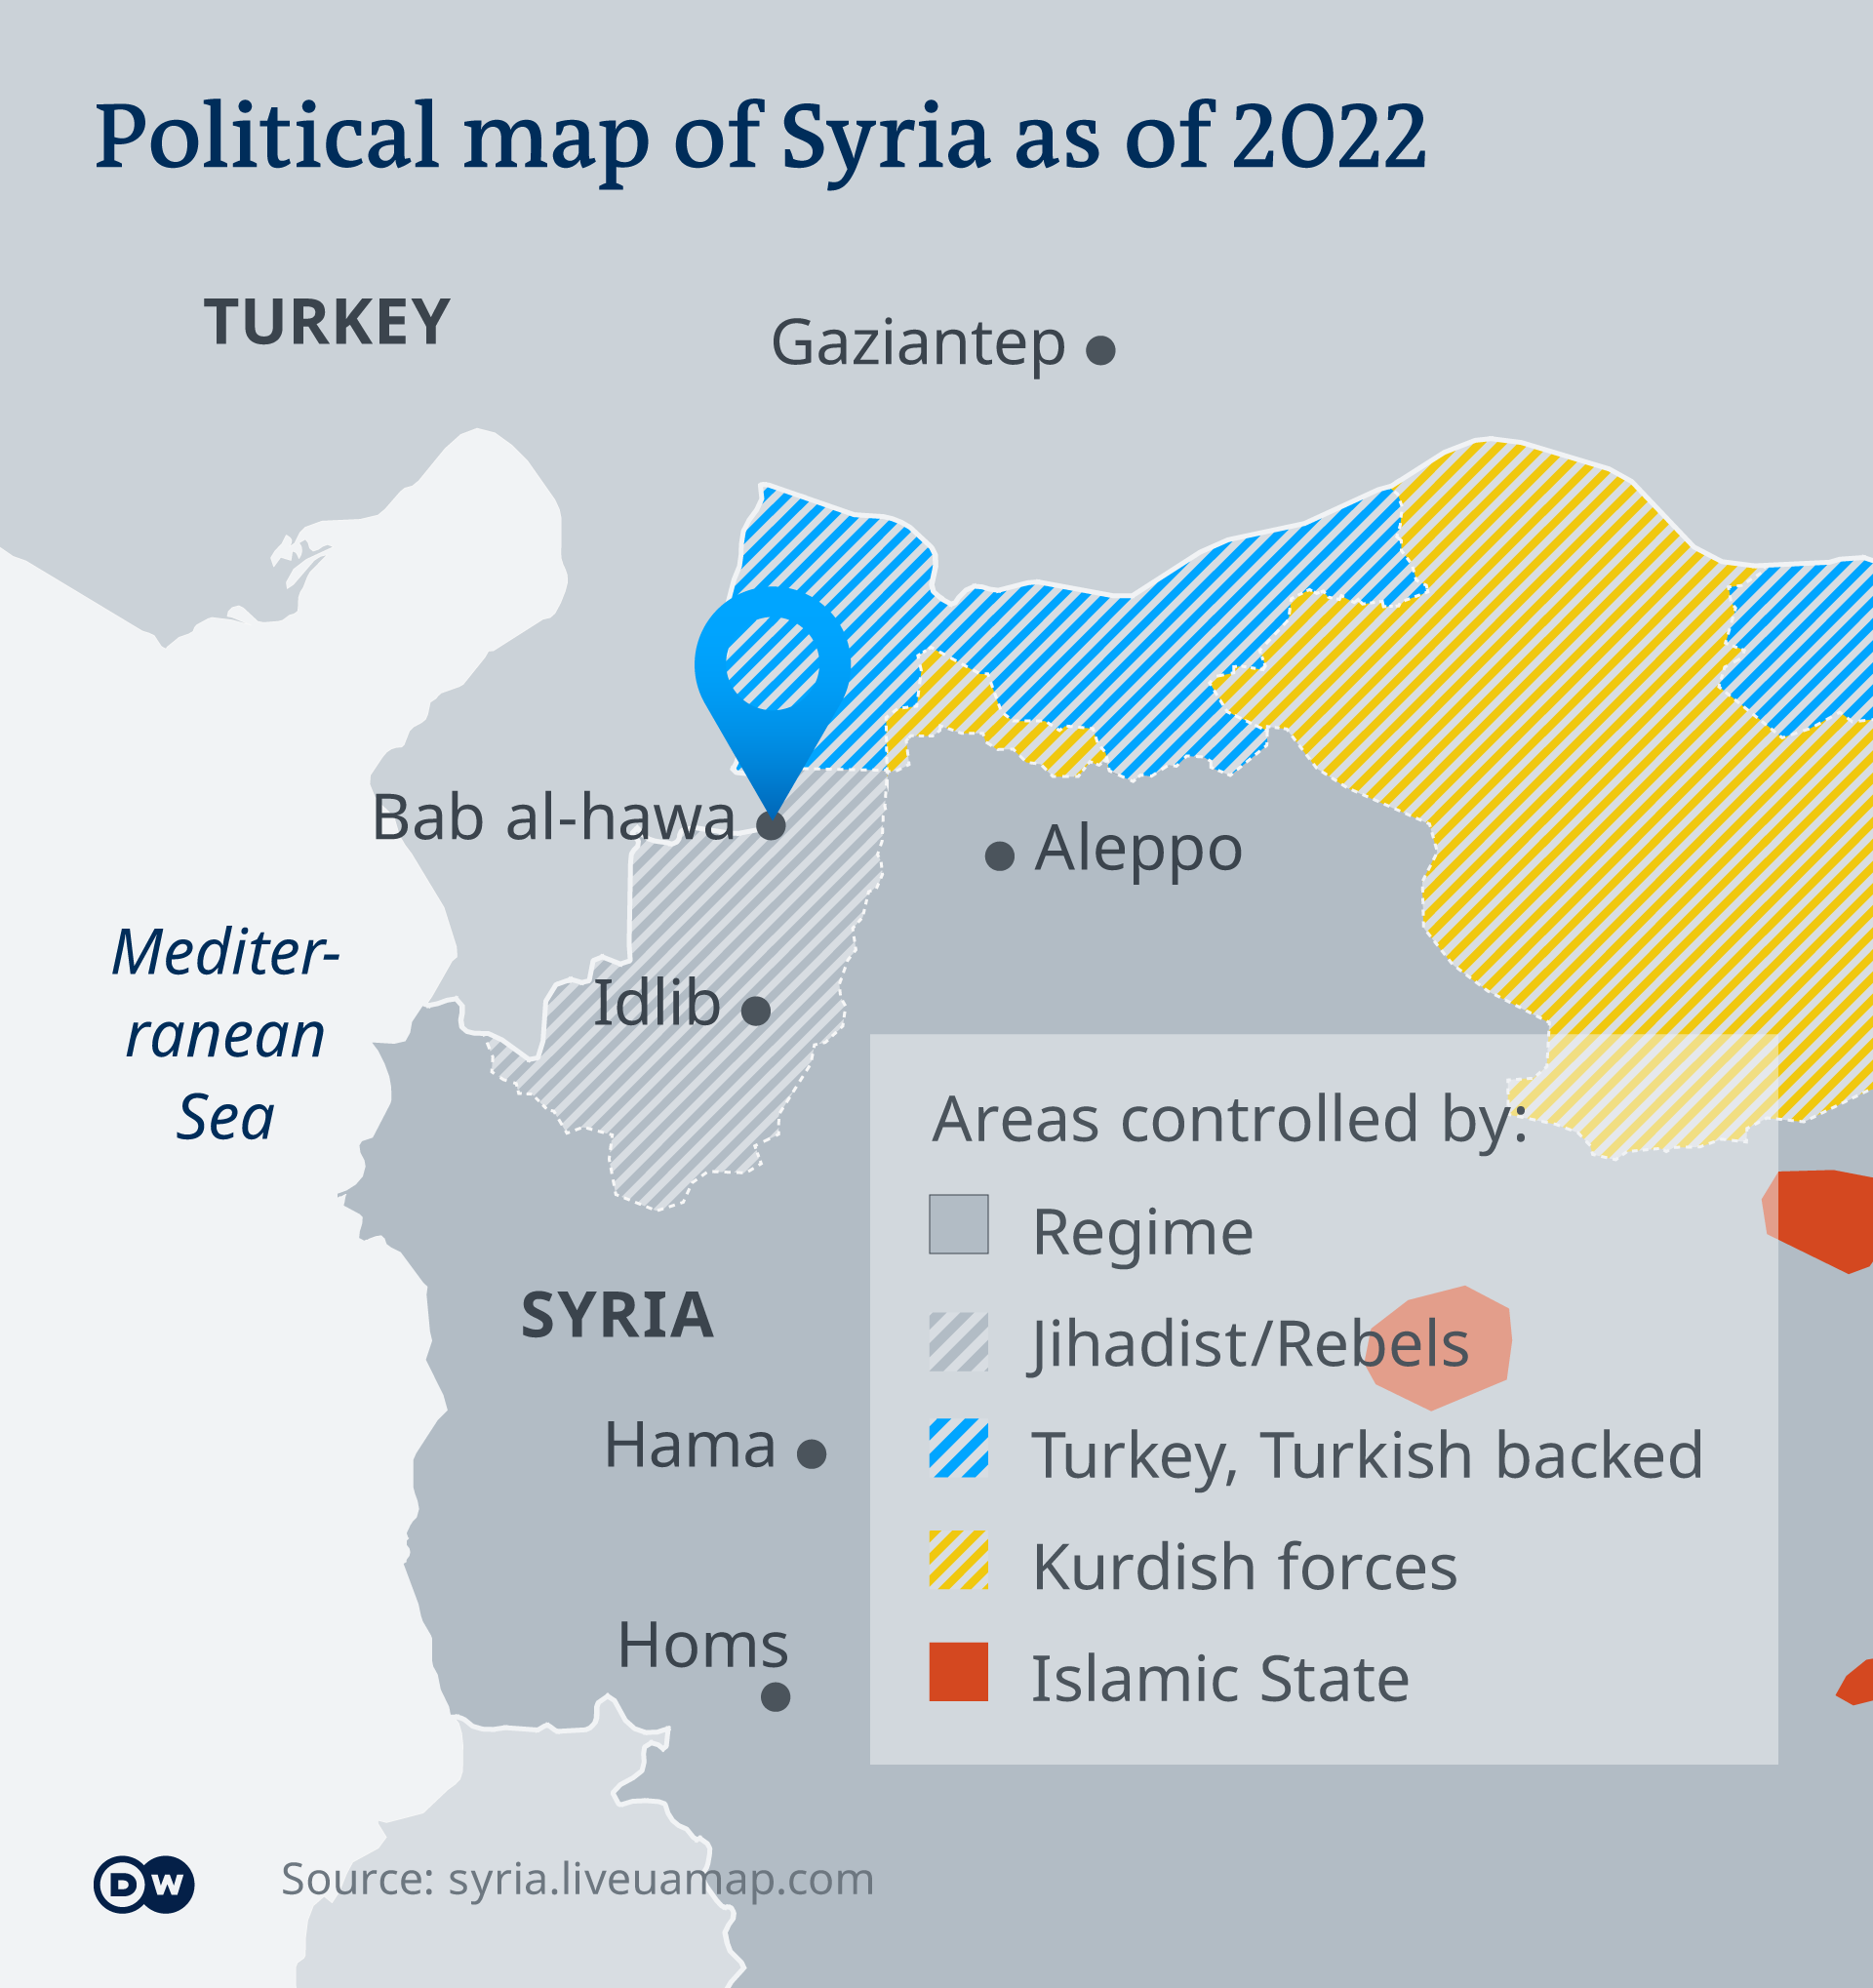 A political map of Syria as of 2022